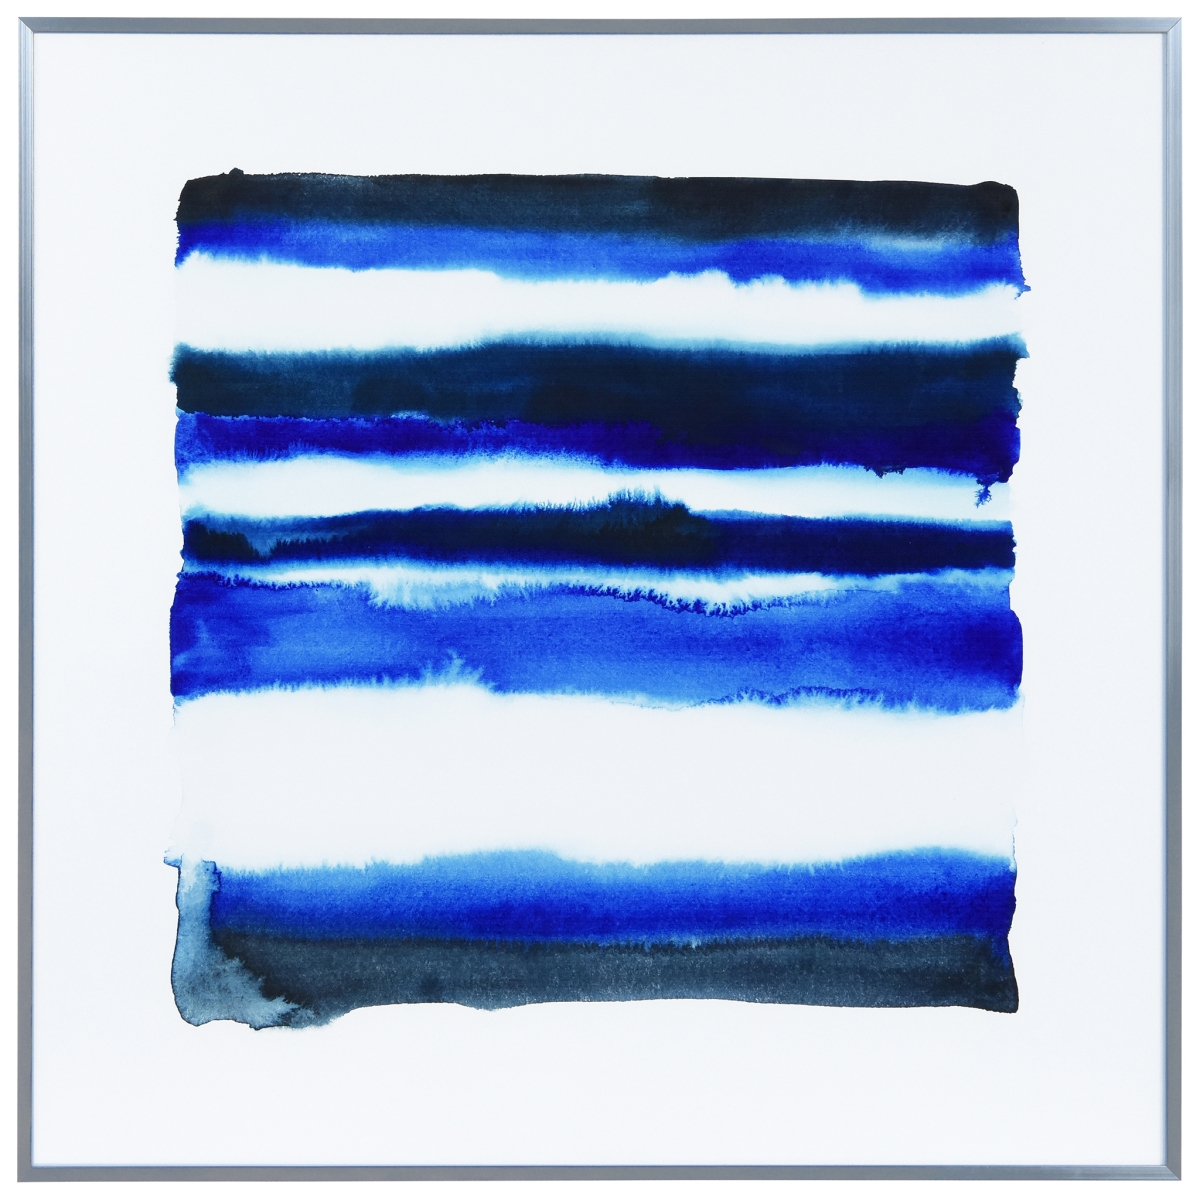 Aags-132794-2424 24 X 24 In. Blue Shorebreak Abstract A Reverse Printed Glass & Anodized Aluminum Silver Frame Contemporary Wall Art